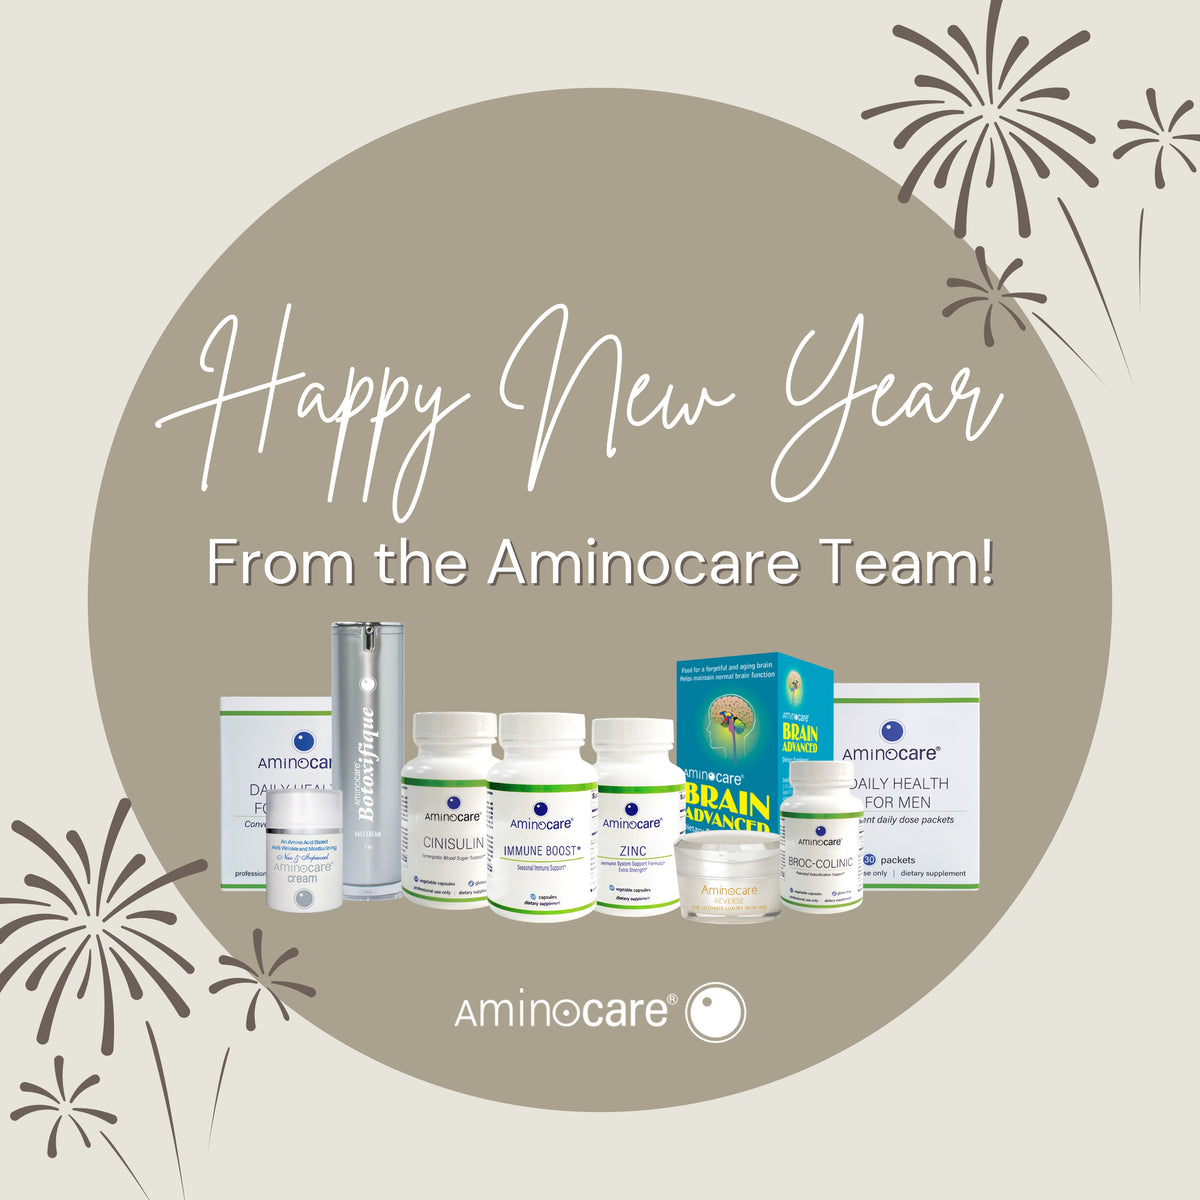 Let Aminocare® Supplements Help You Keep Your New Year's Resolutions!